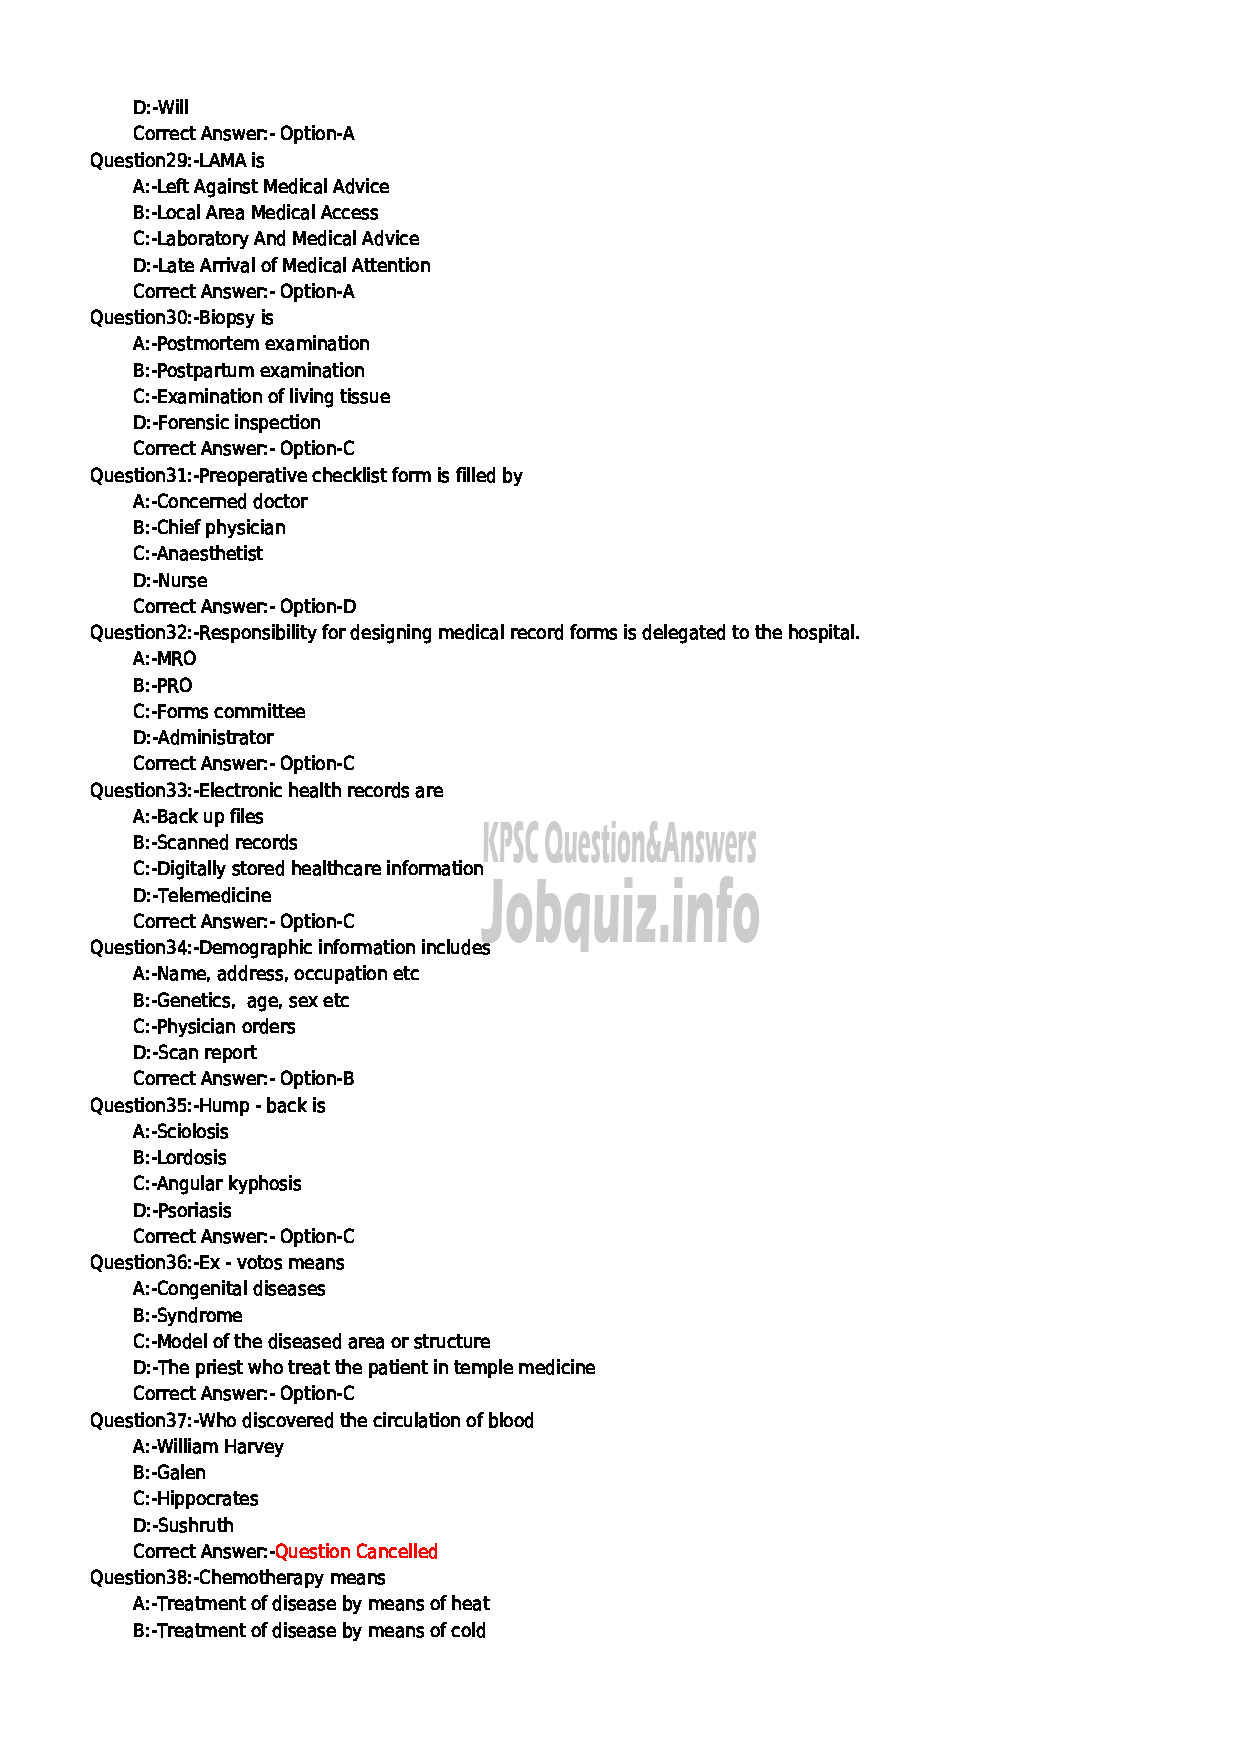 Kerala PSC Question Paper - MEDICAL RECORD LIBRARIAN GR II INSURANCE MEDICAL SERVICES-4